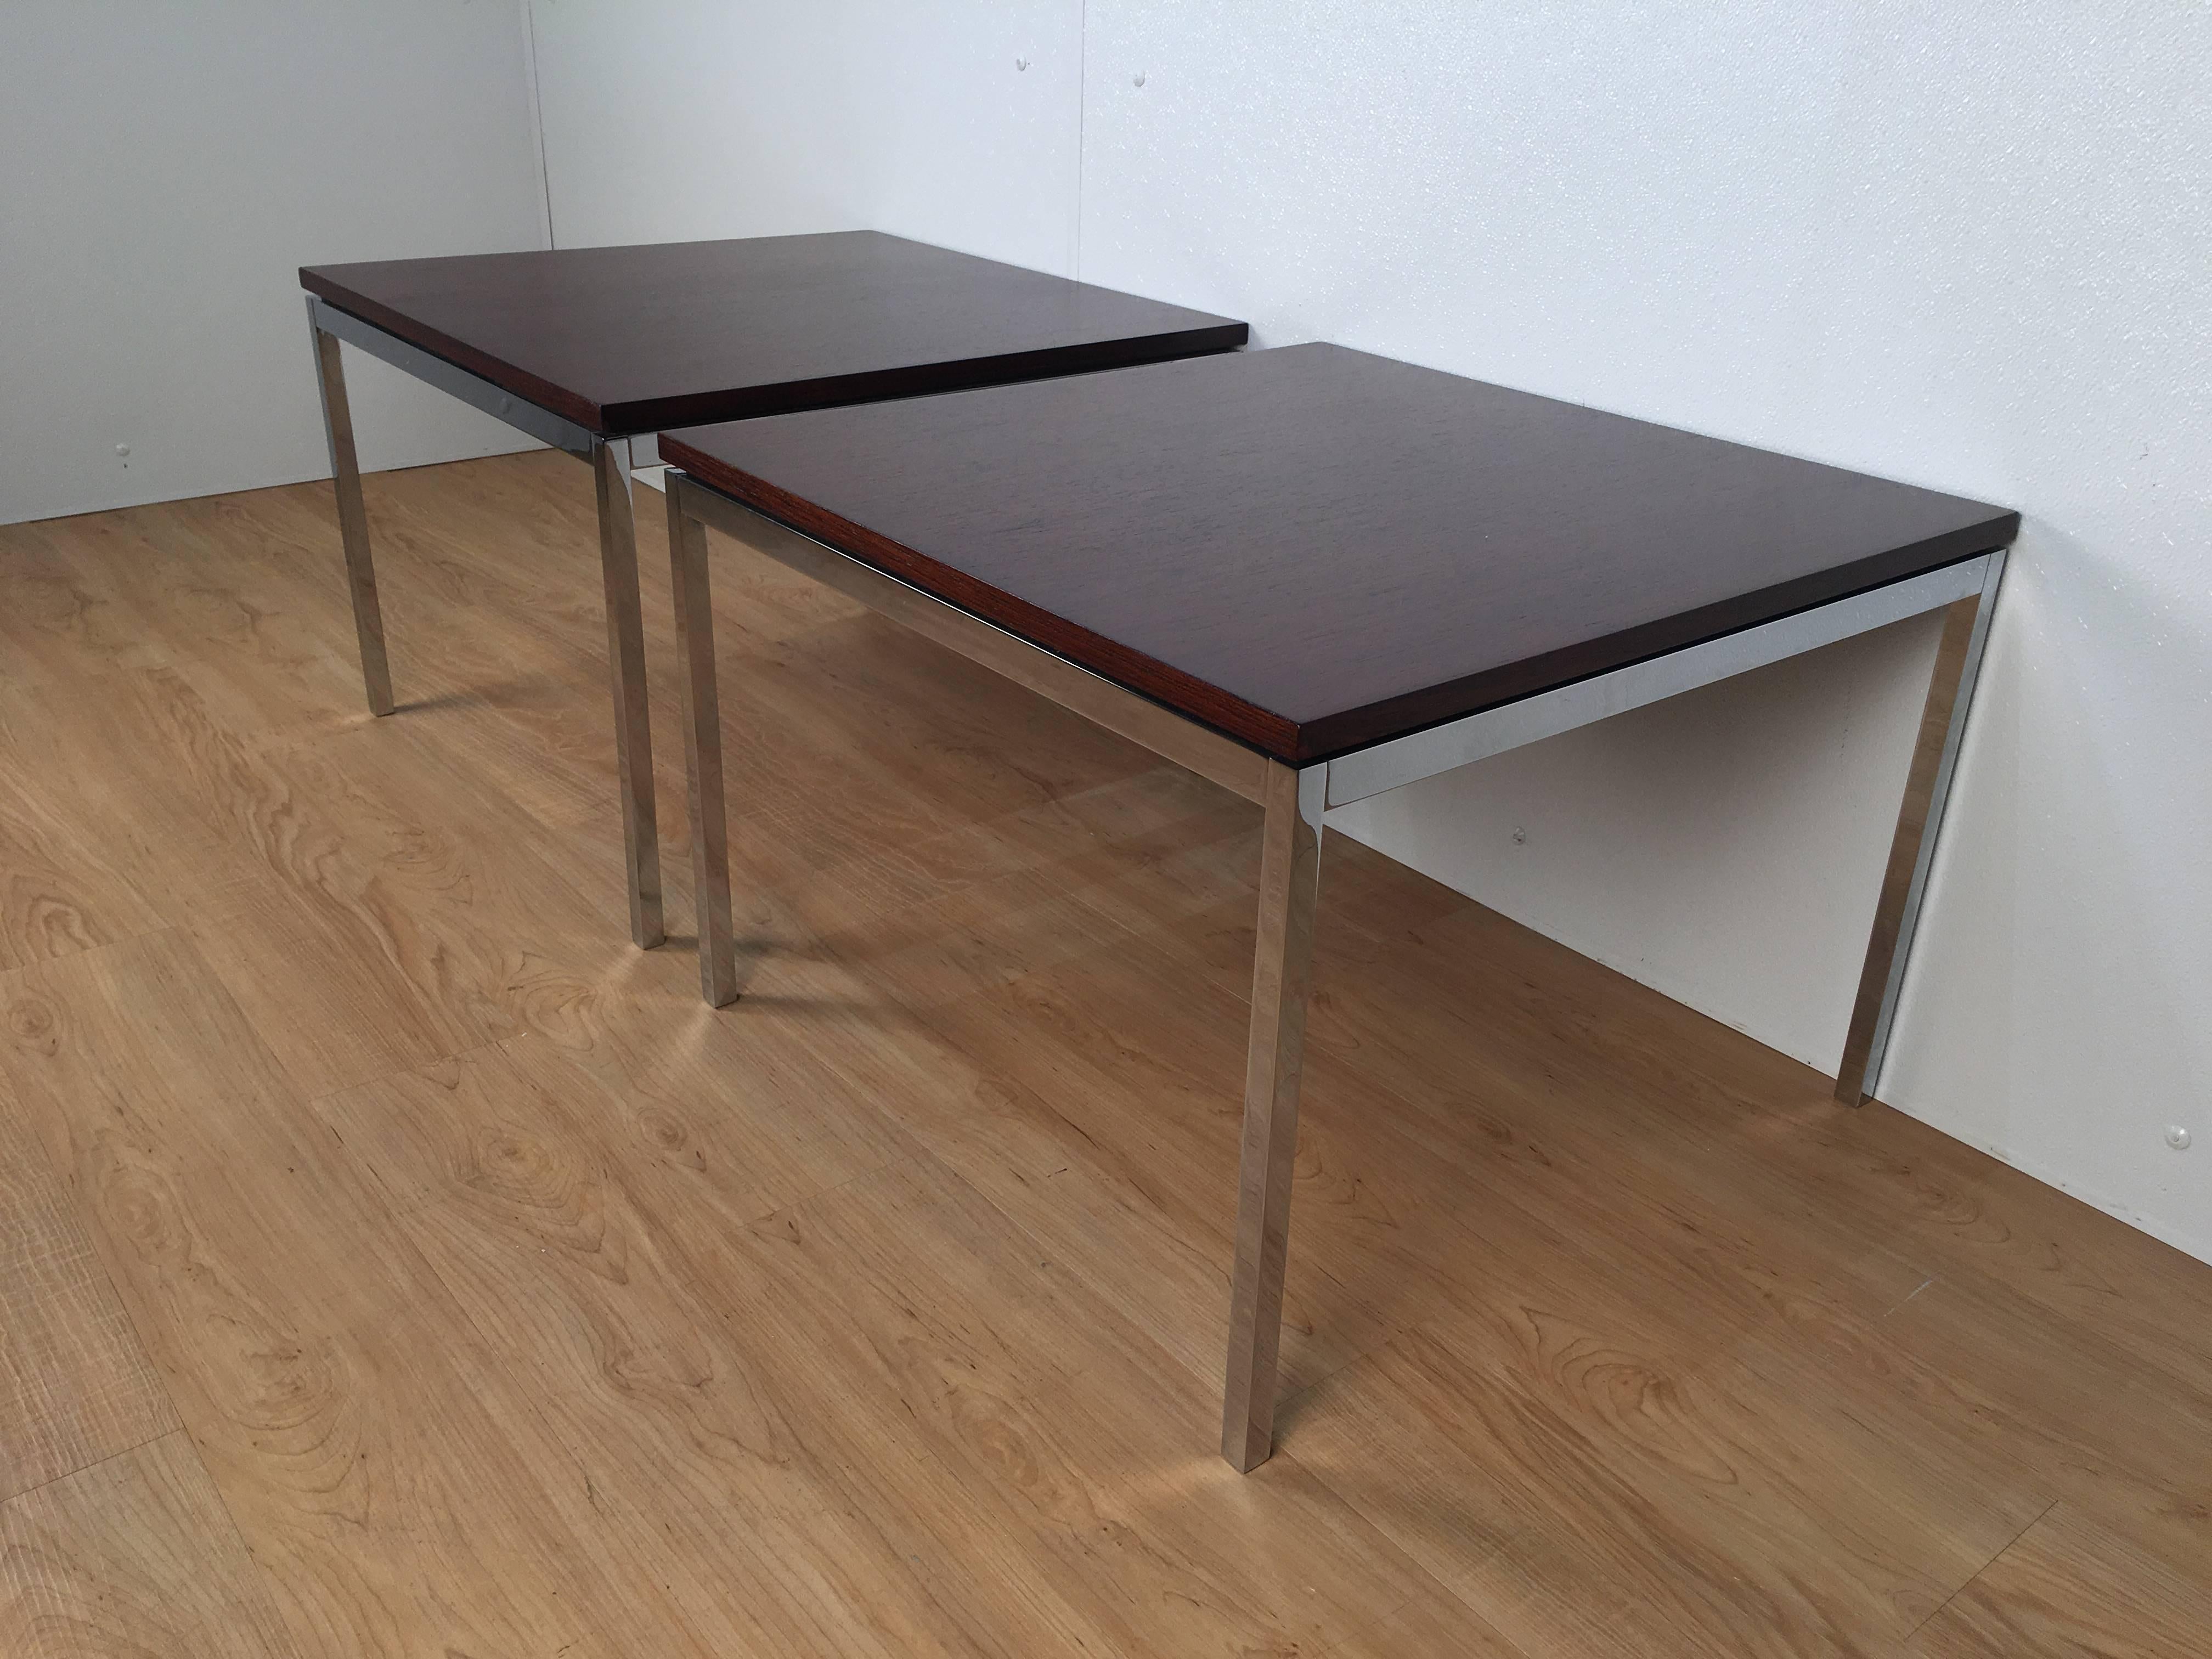 Pristine pair of Florence Knoll t-Angle side tables. Bright chrome base with rosewood top. Manufactured by Knoll International.